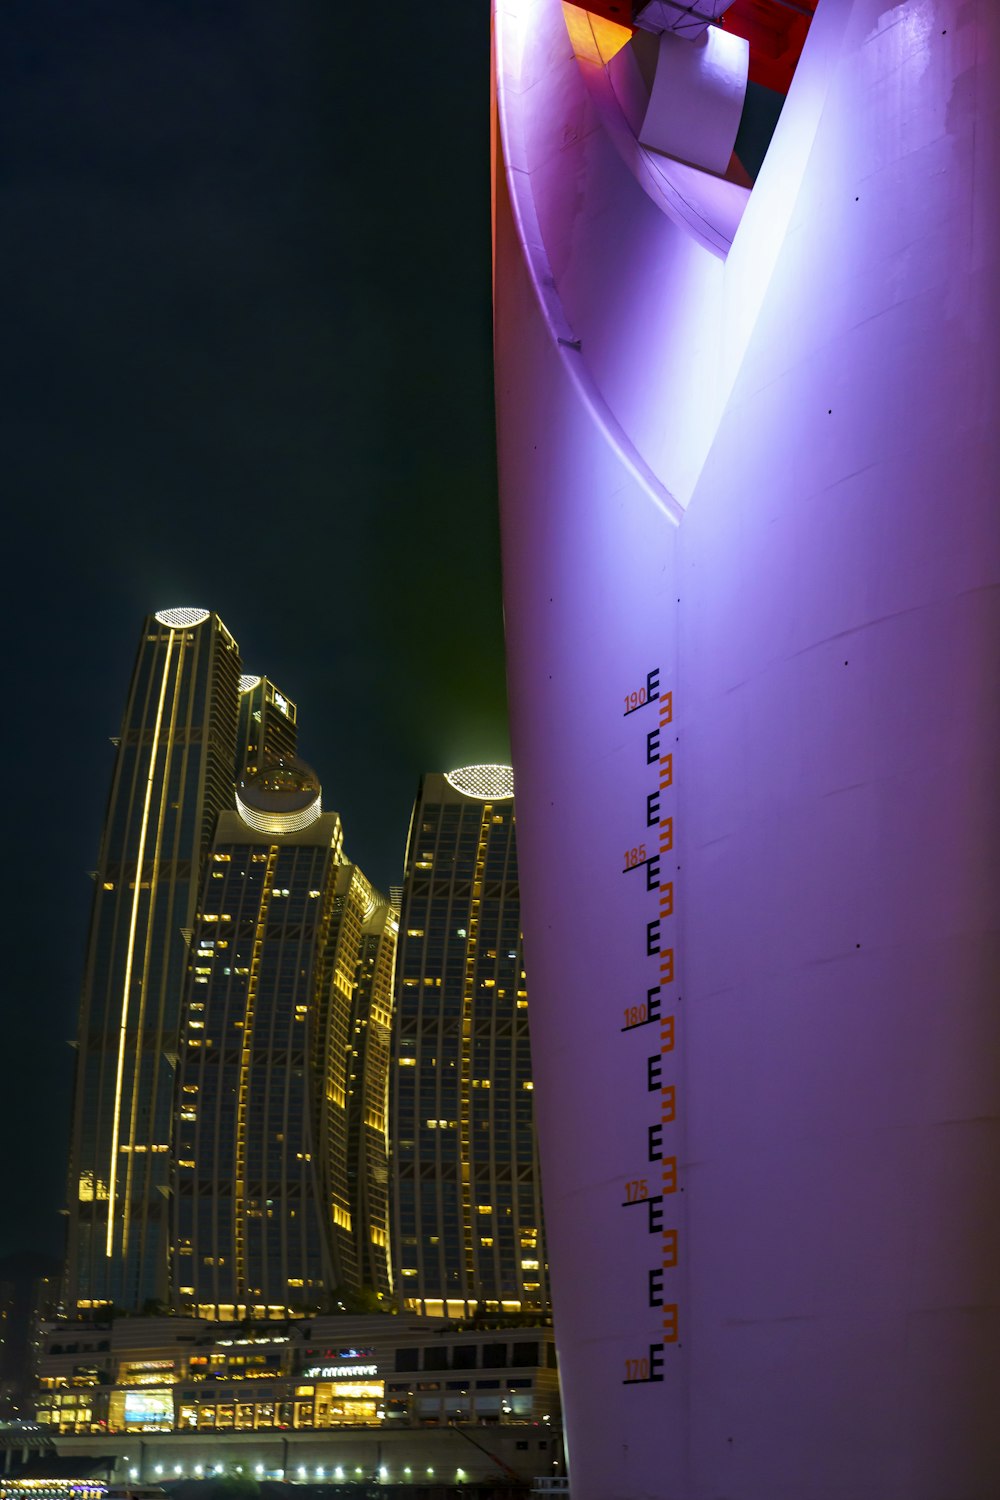 a large jetliner sitting next to a tall building